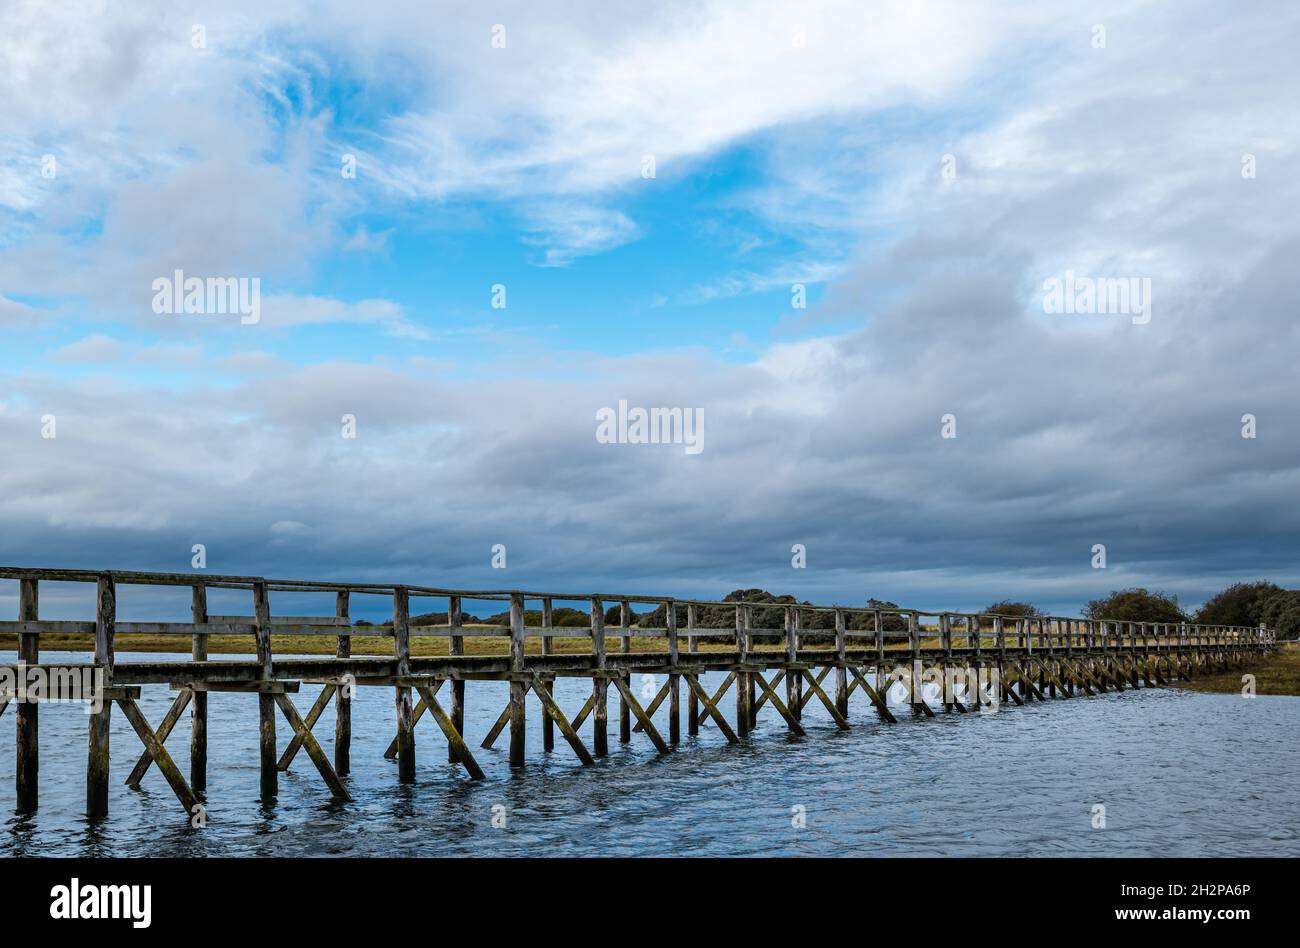 Wooden footbridge over estuary to Aberlady nature reserve with flock of geese in the sky, East Lothian, Scotland, UK Stock Photo